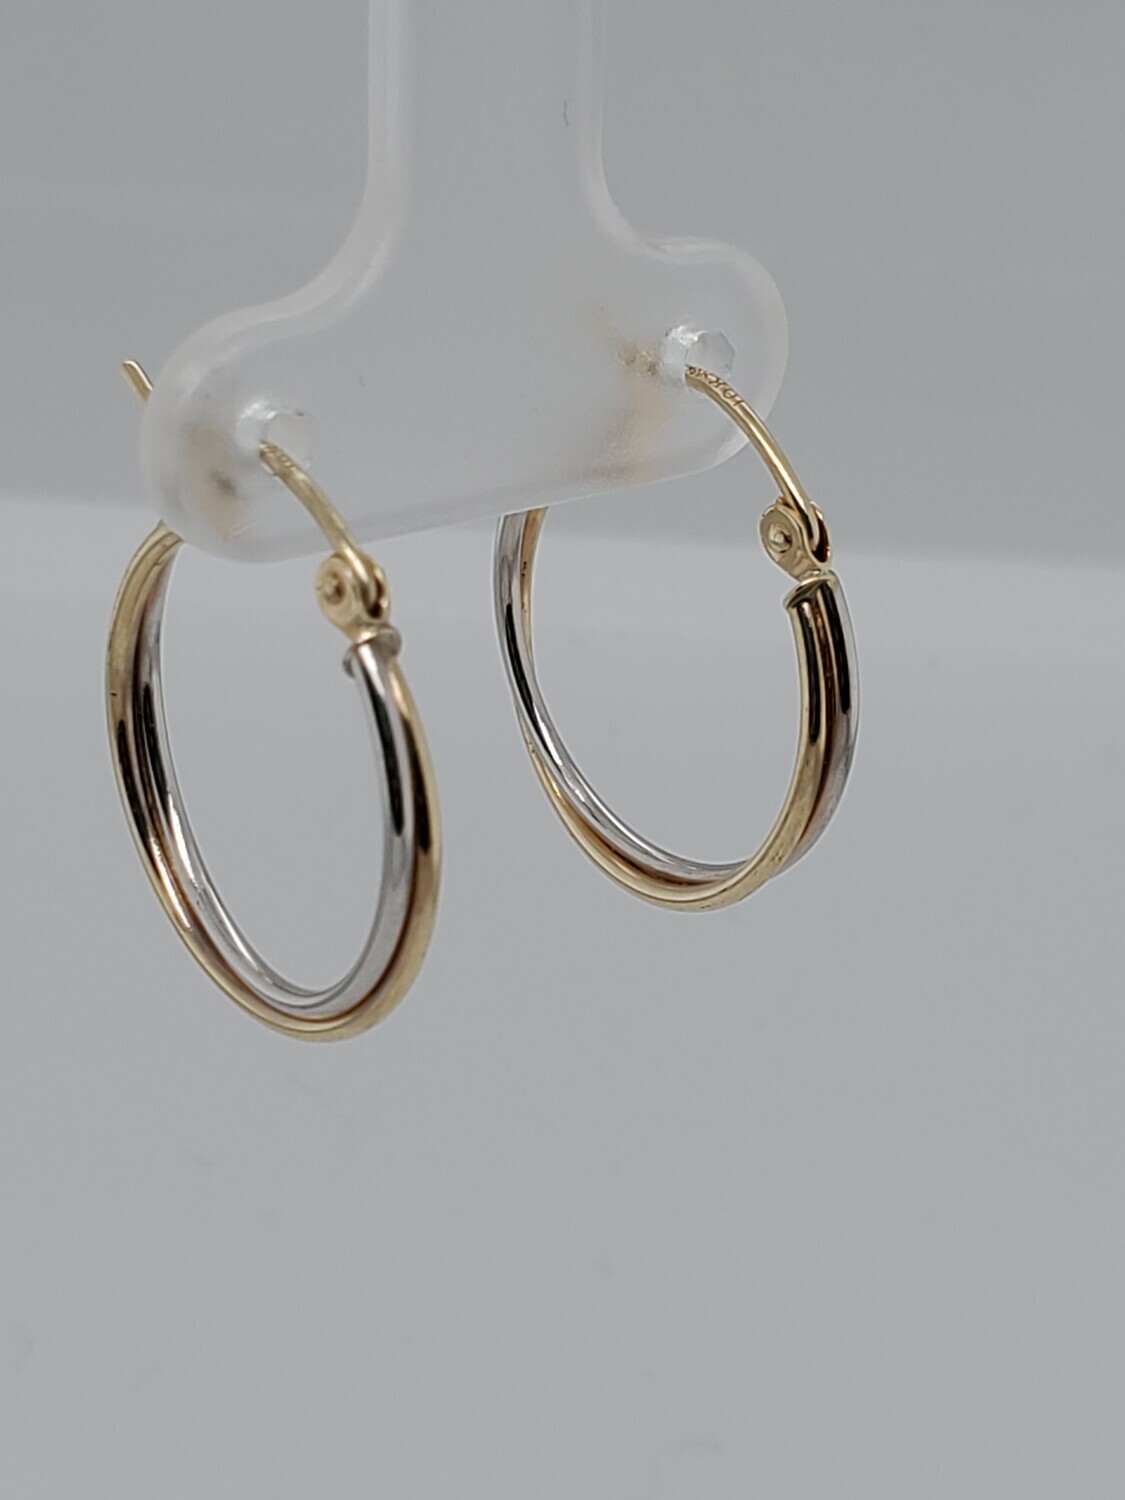 BRAND NEW!! 10KT TWO TONE HOLLOW SMALL DOUBLE HOOP EARRINGS  INVENTORY # I-18343 75TH AVE